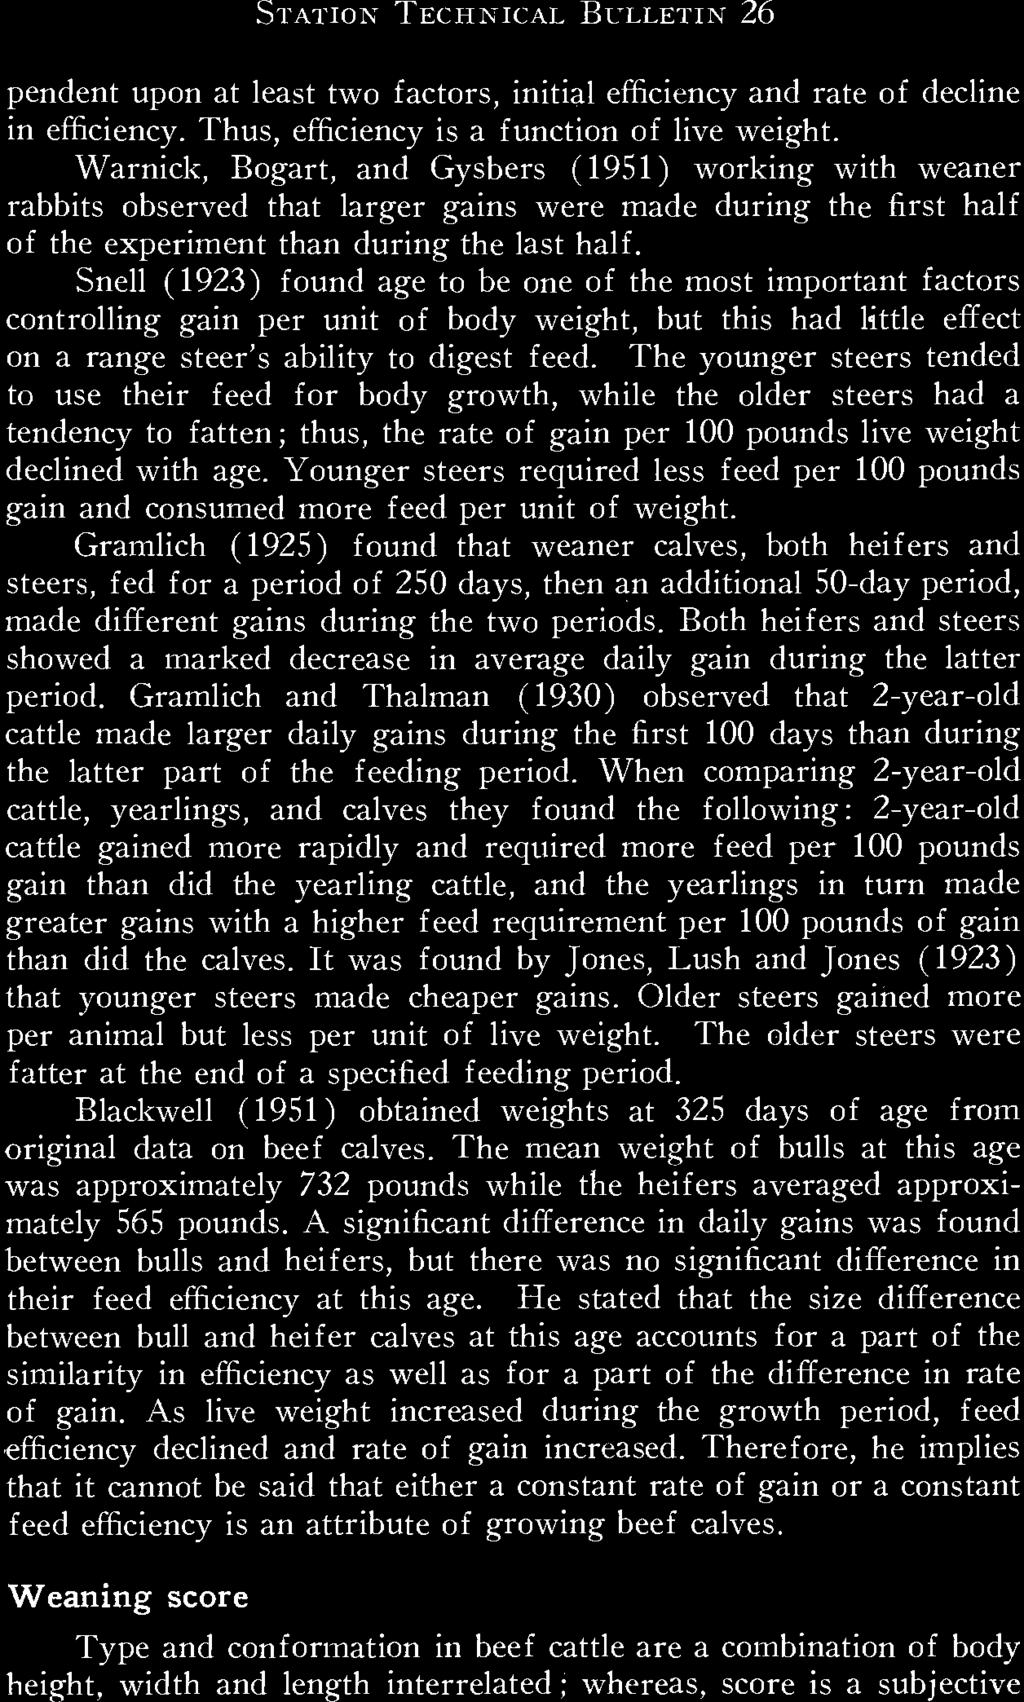 Snell (1923) found age to be one of the most important factors controlling gain per unit of body weight, but this had little effect on a range steer's ability to digest feed.